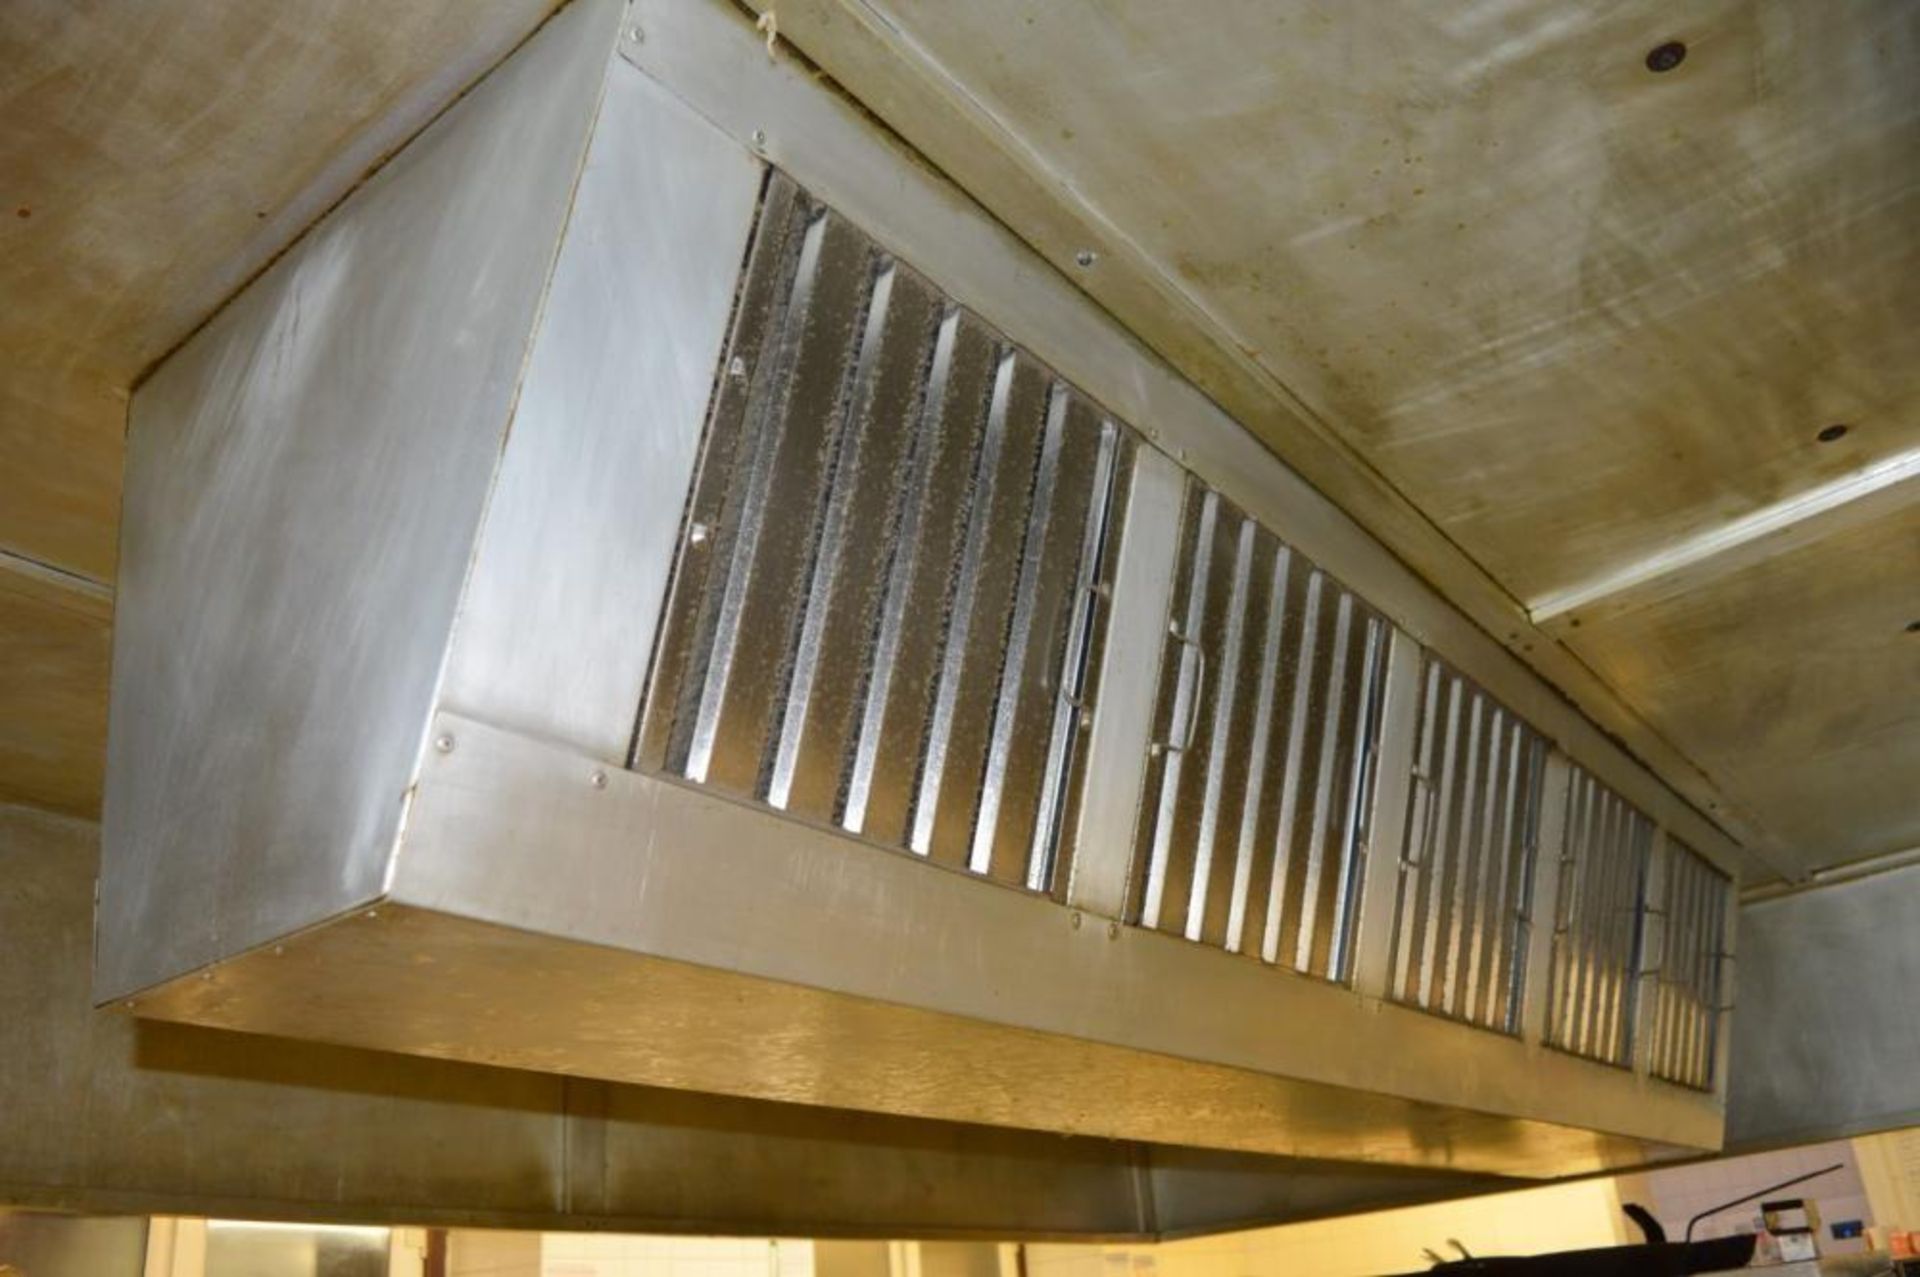 1 x Stainless Steel Canopy Extractor Hood With Filters - H46 x W232 x L351 cms - Filter Unit 250 x 5 - Image 3 of 4